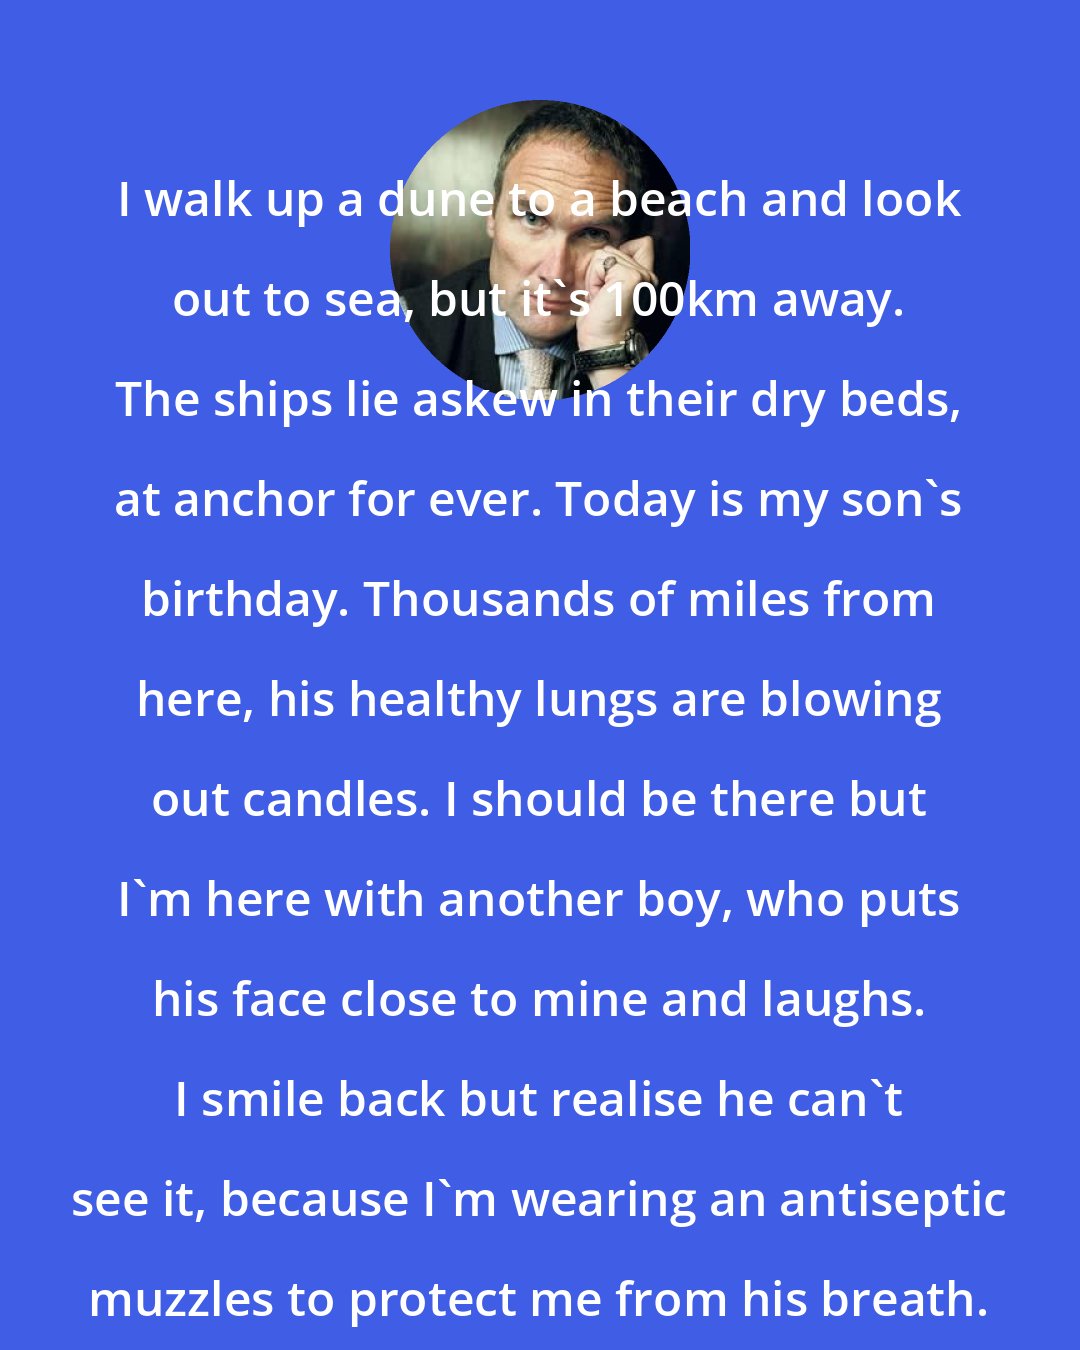 A. A. Gill: I walk up a dune to a beach and look out to sea, but it's 100km away. The ships lie askew in their dry beds, at anchor for ever. Today is my son's birthday. Thousands of miles from here, his healthy lungs are blowing out candles. I should be there but I'm here with another boy, who puts his face close to mine and laughs. I smile back but realise he can't see it, because I'm wearing an antiseptic muzzles to protect me from his breath.